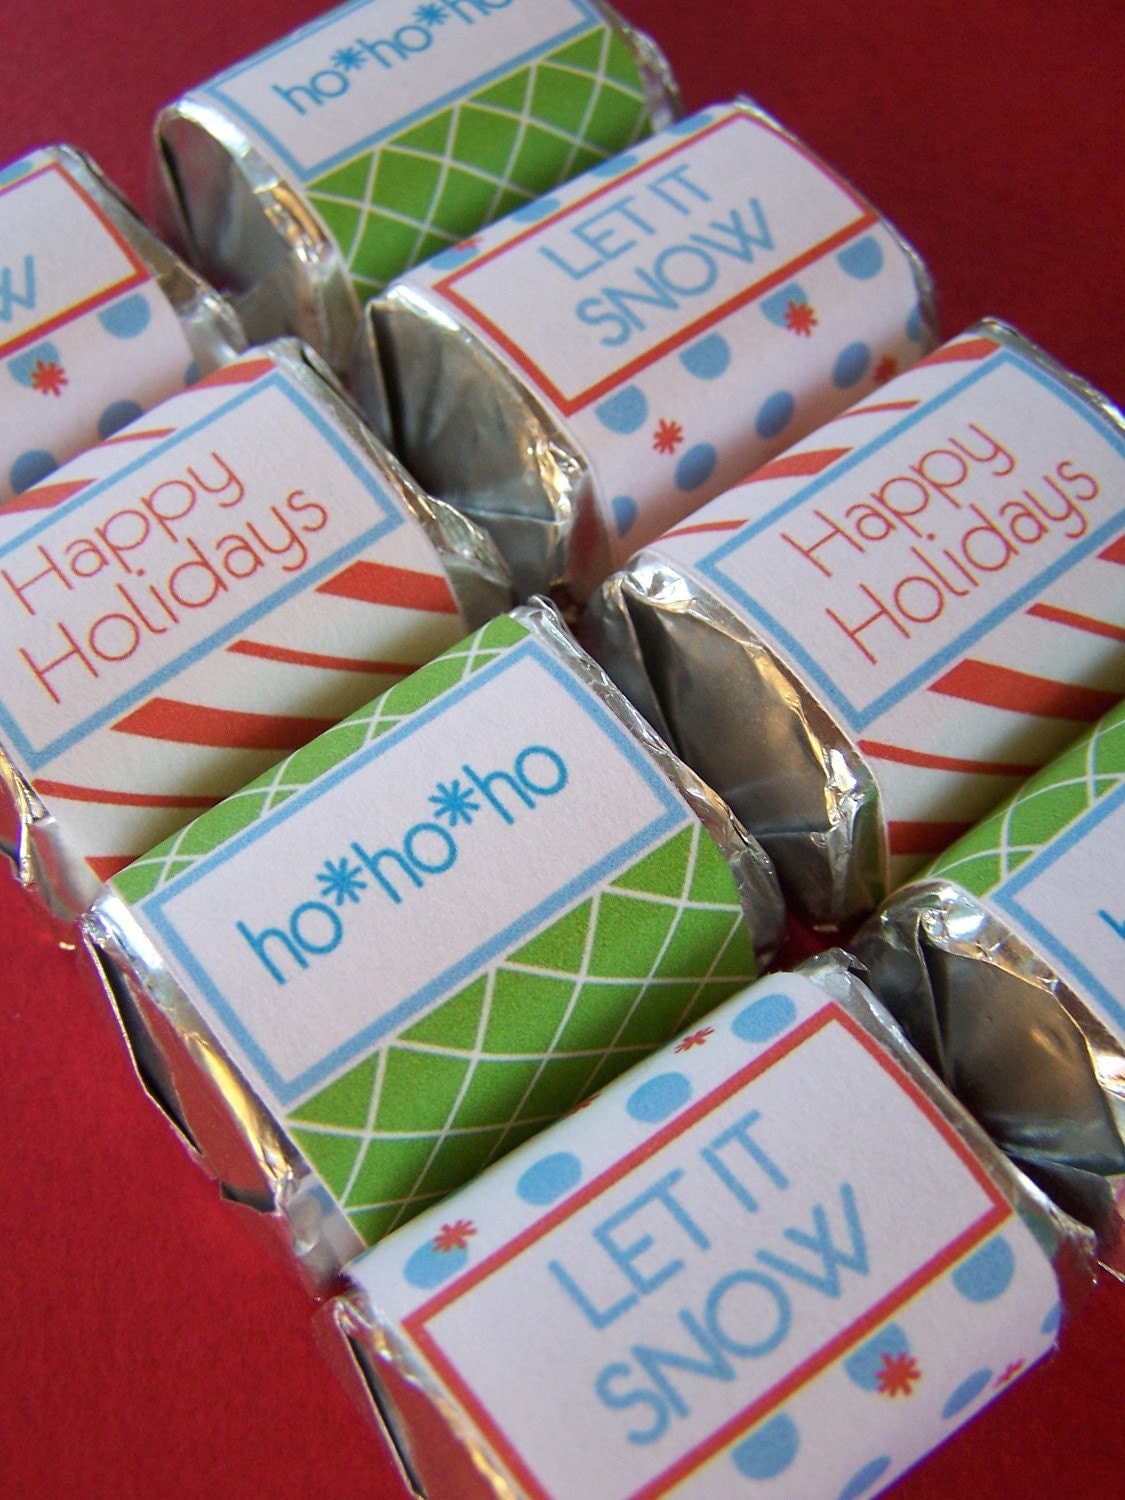 Christmas Candy Favors